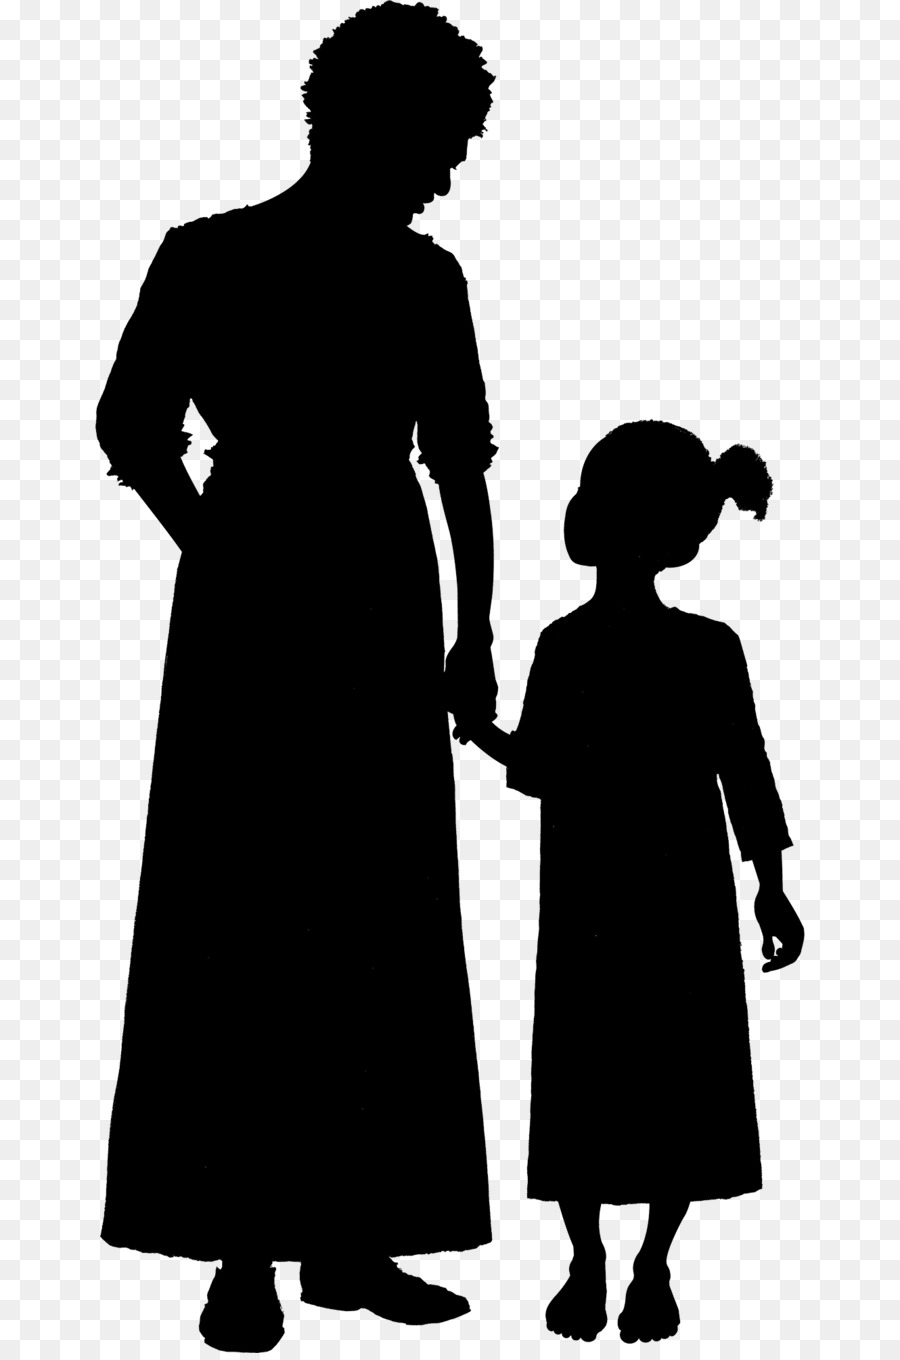 Old Woman PNG Black And White - Silhouette Woman Child